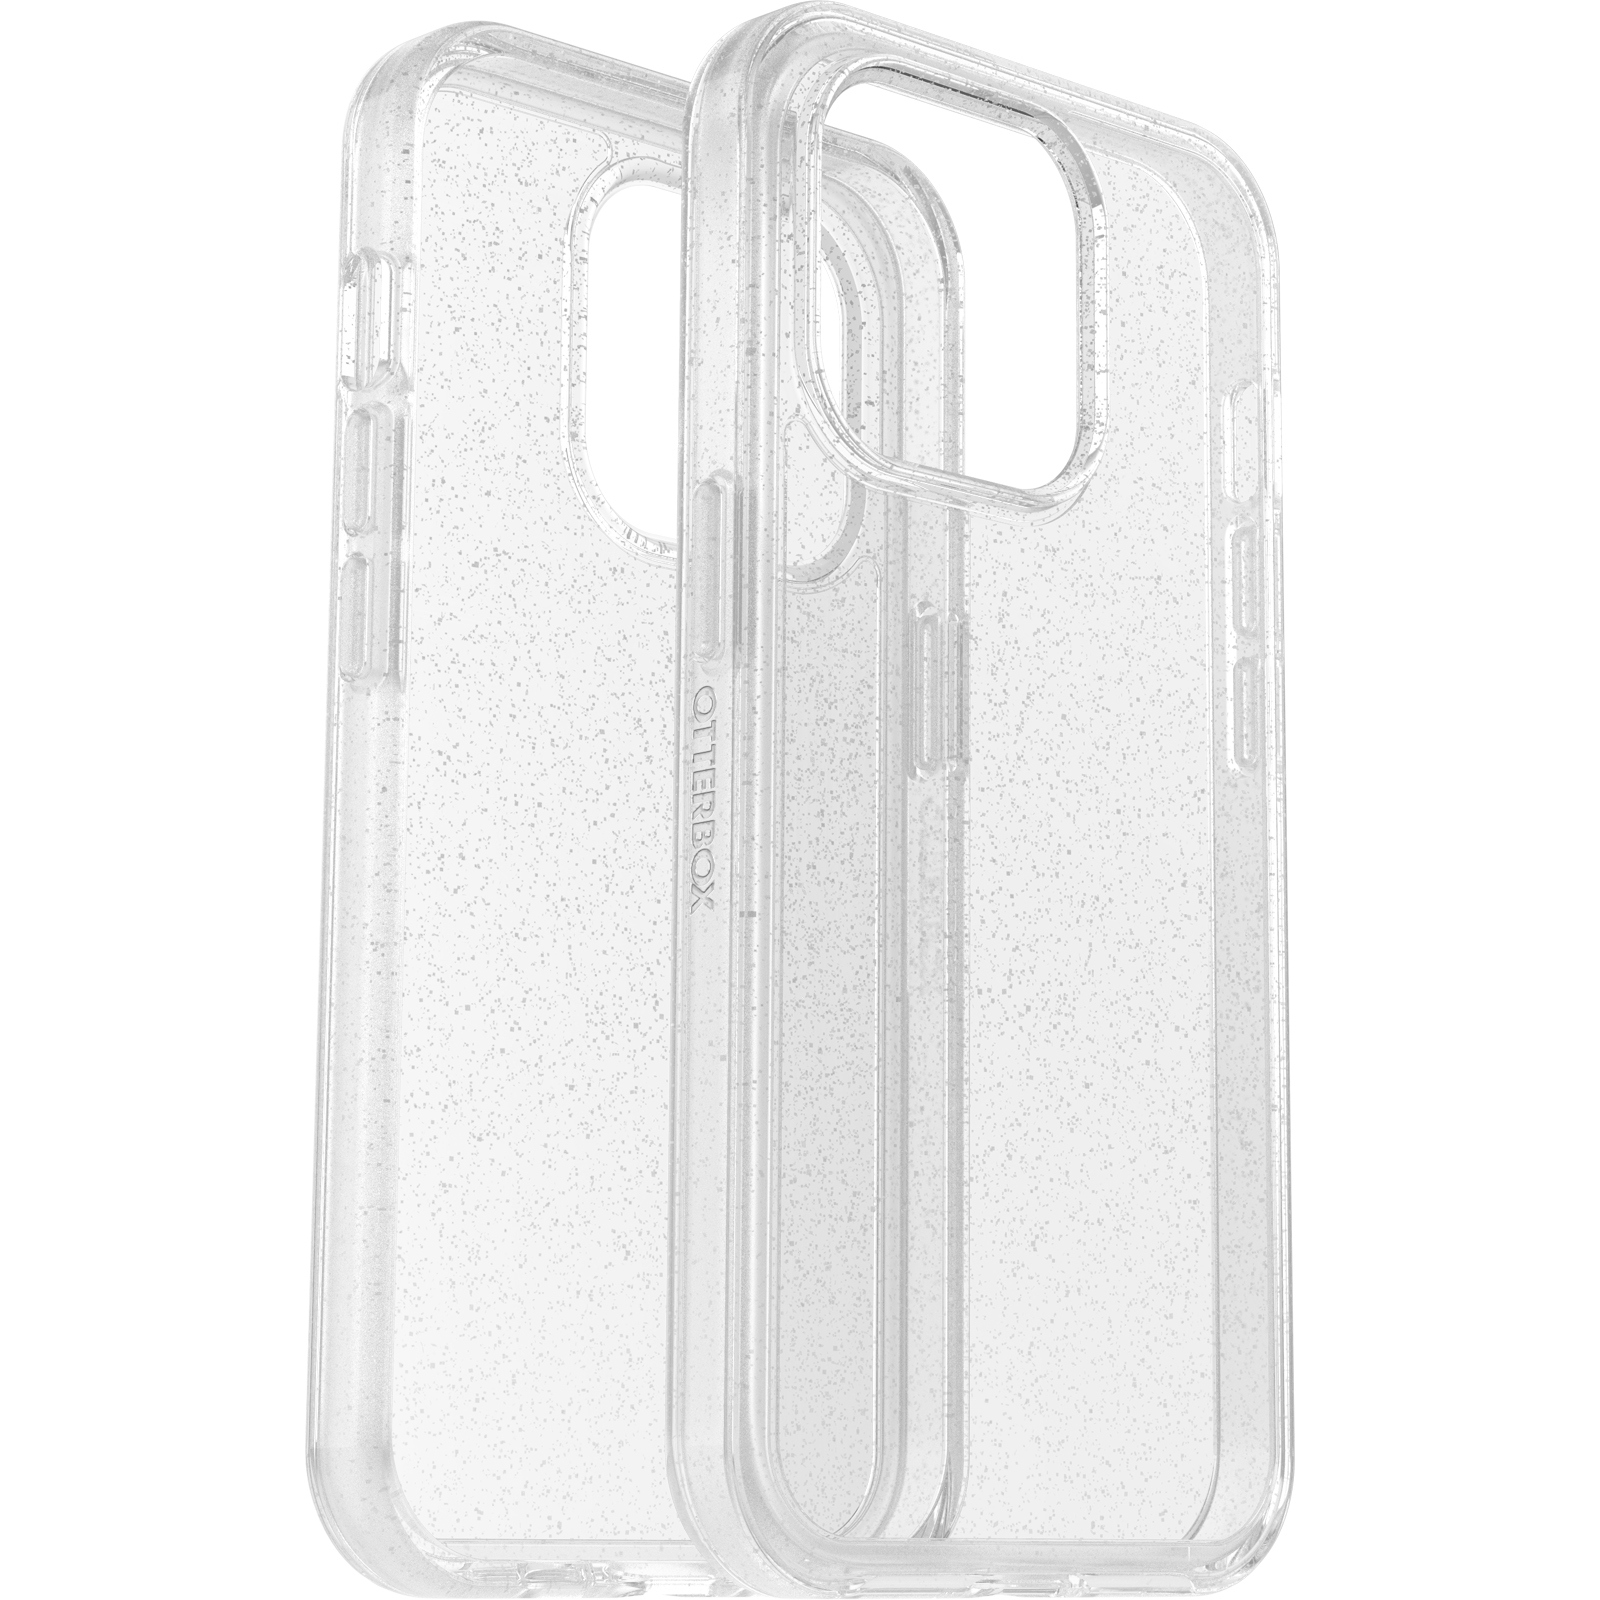 14 PRO, Symmetry, CLEAR Backcover, APPLE, OTTERBOX IPHONE